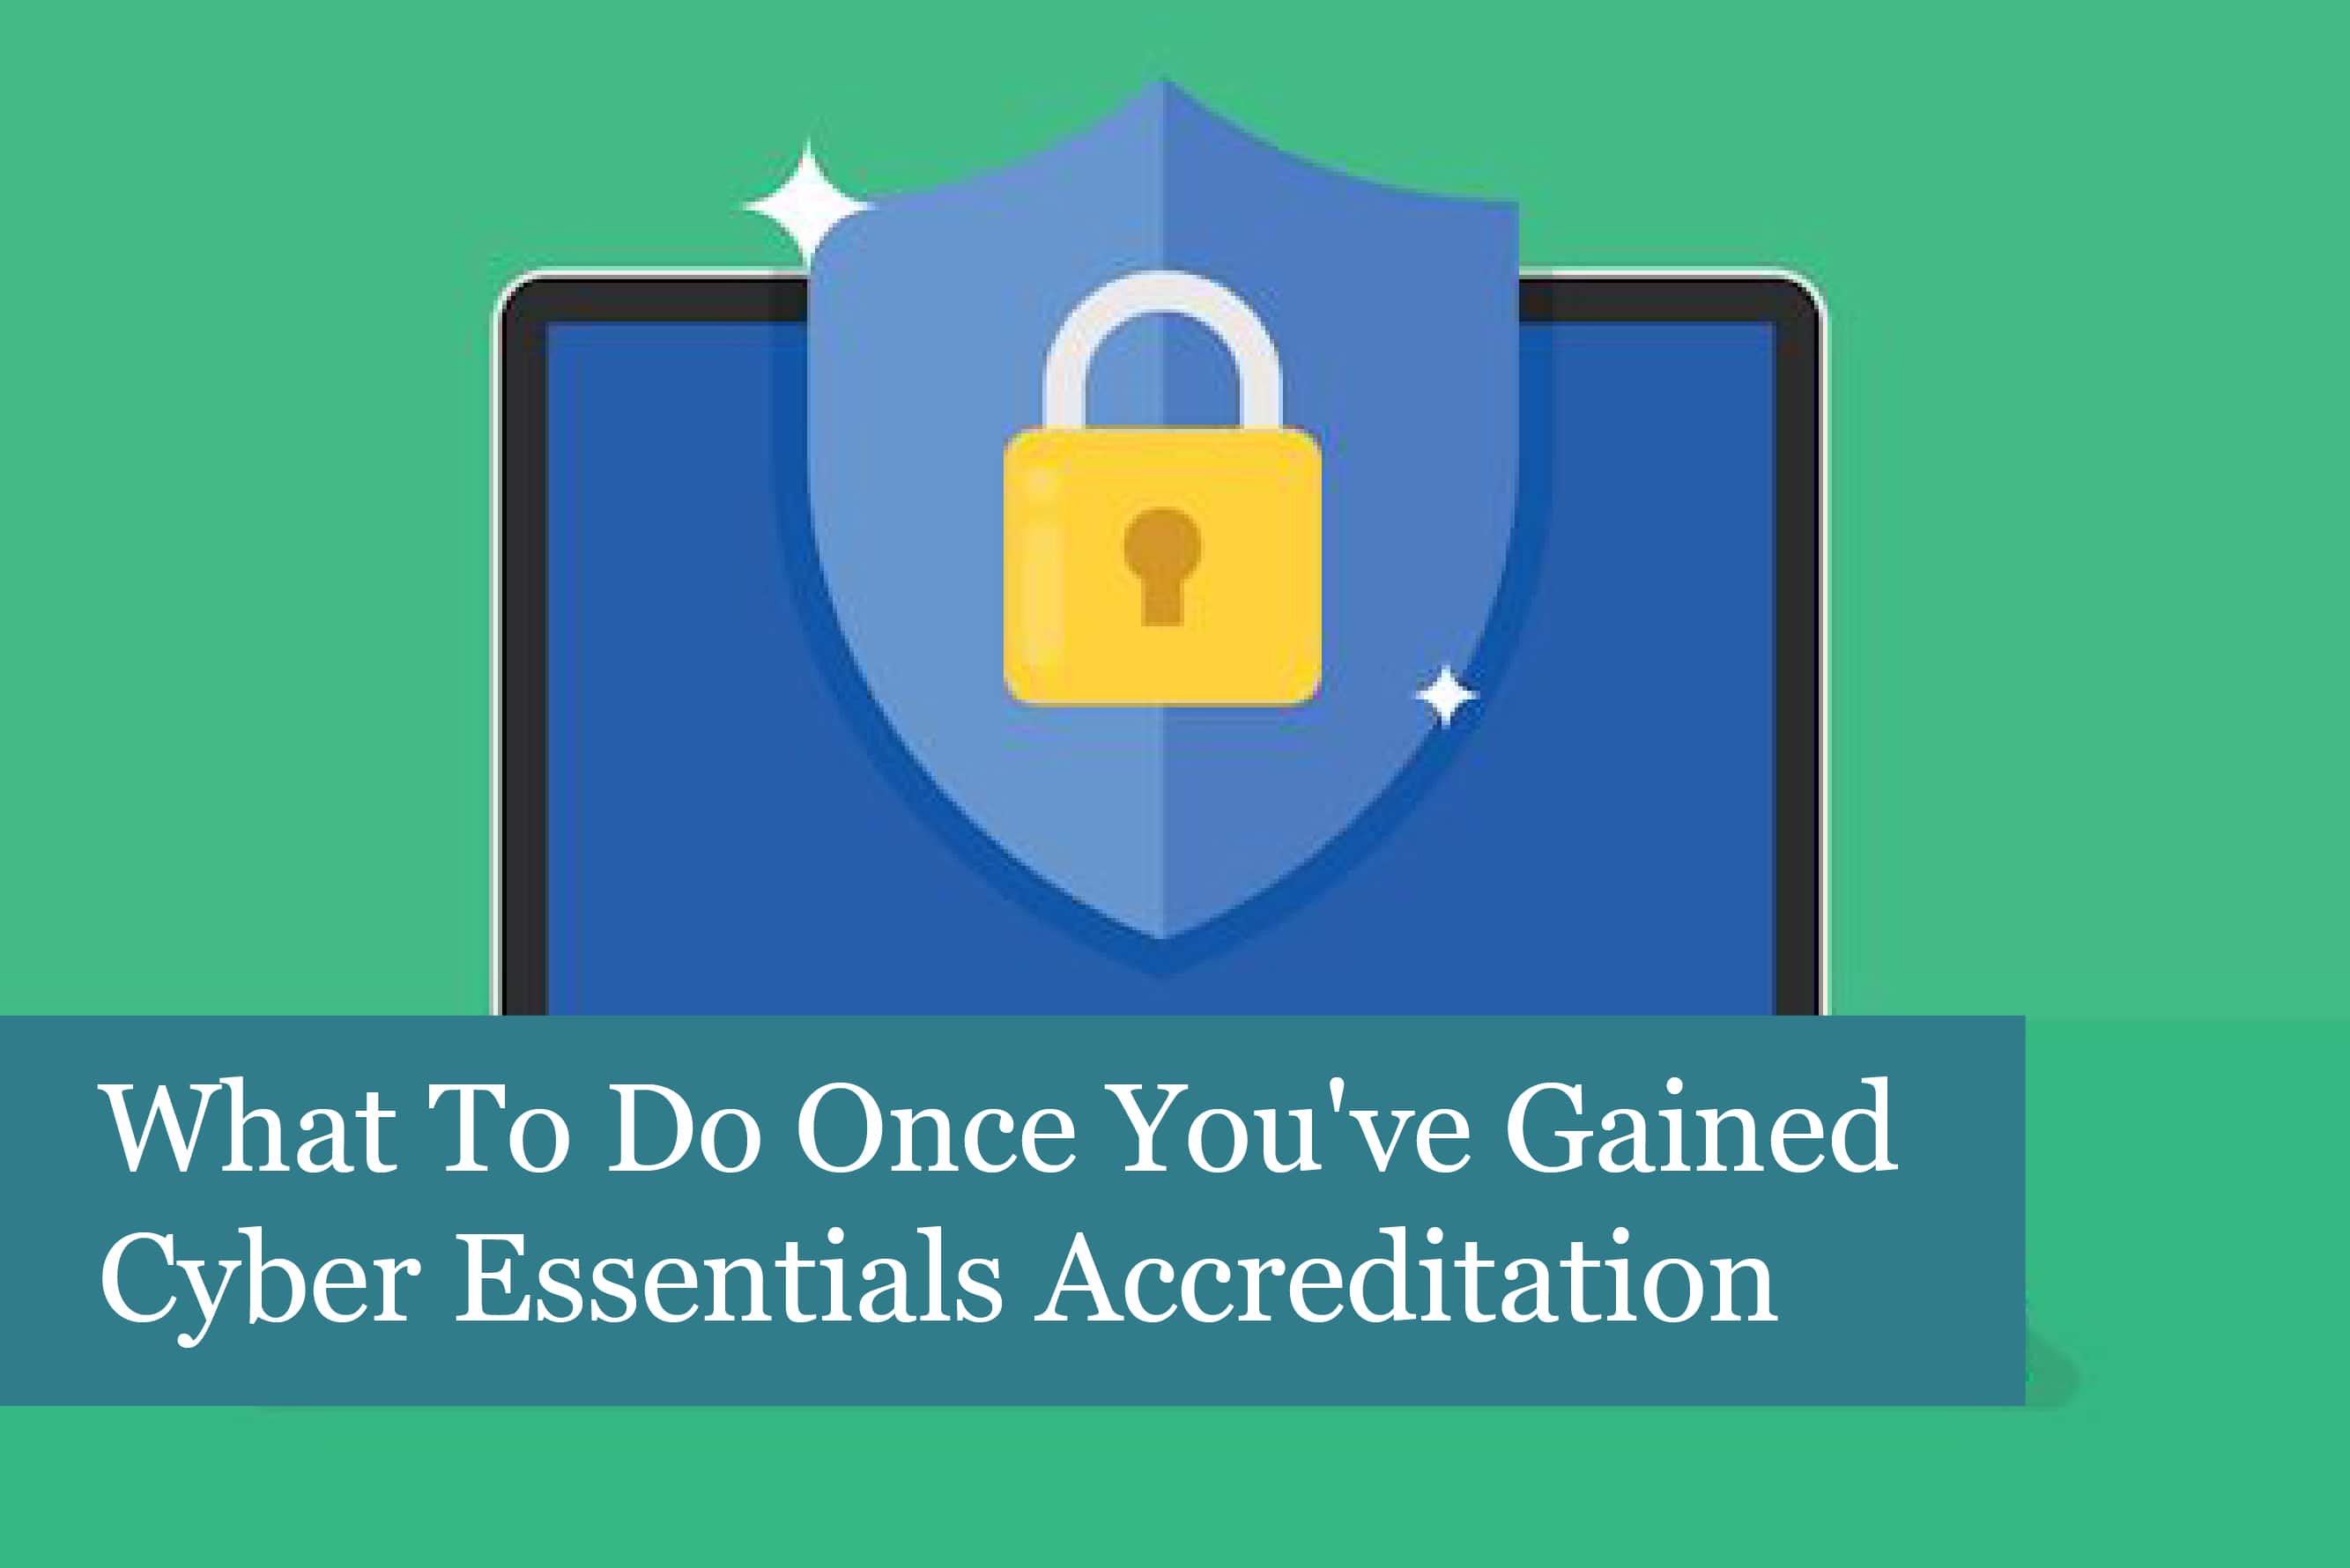 What to do once you've gained Cyber Essentials Accreditation